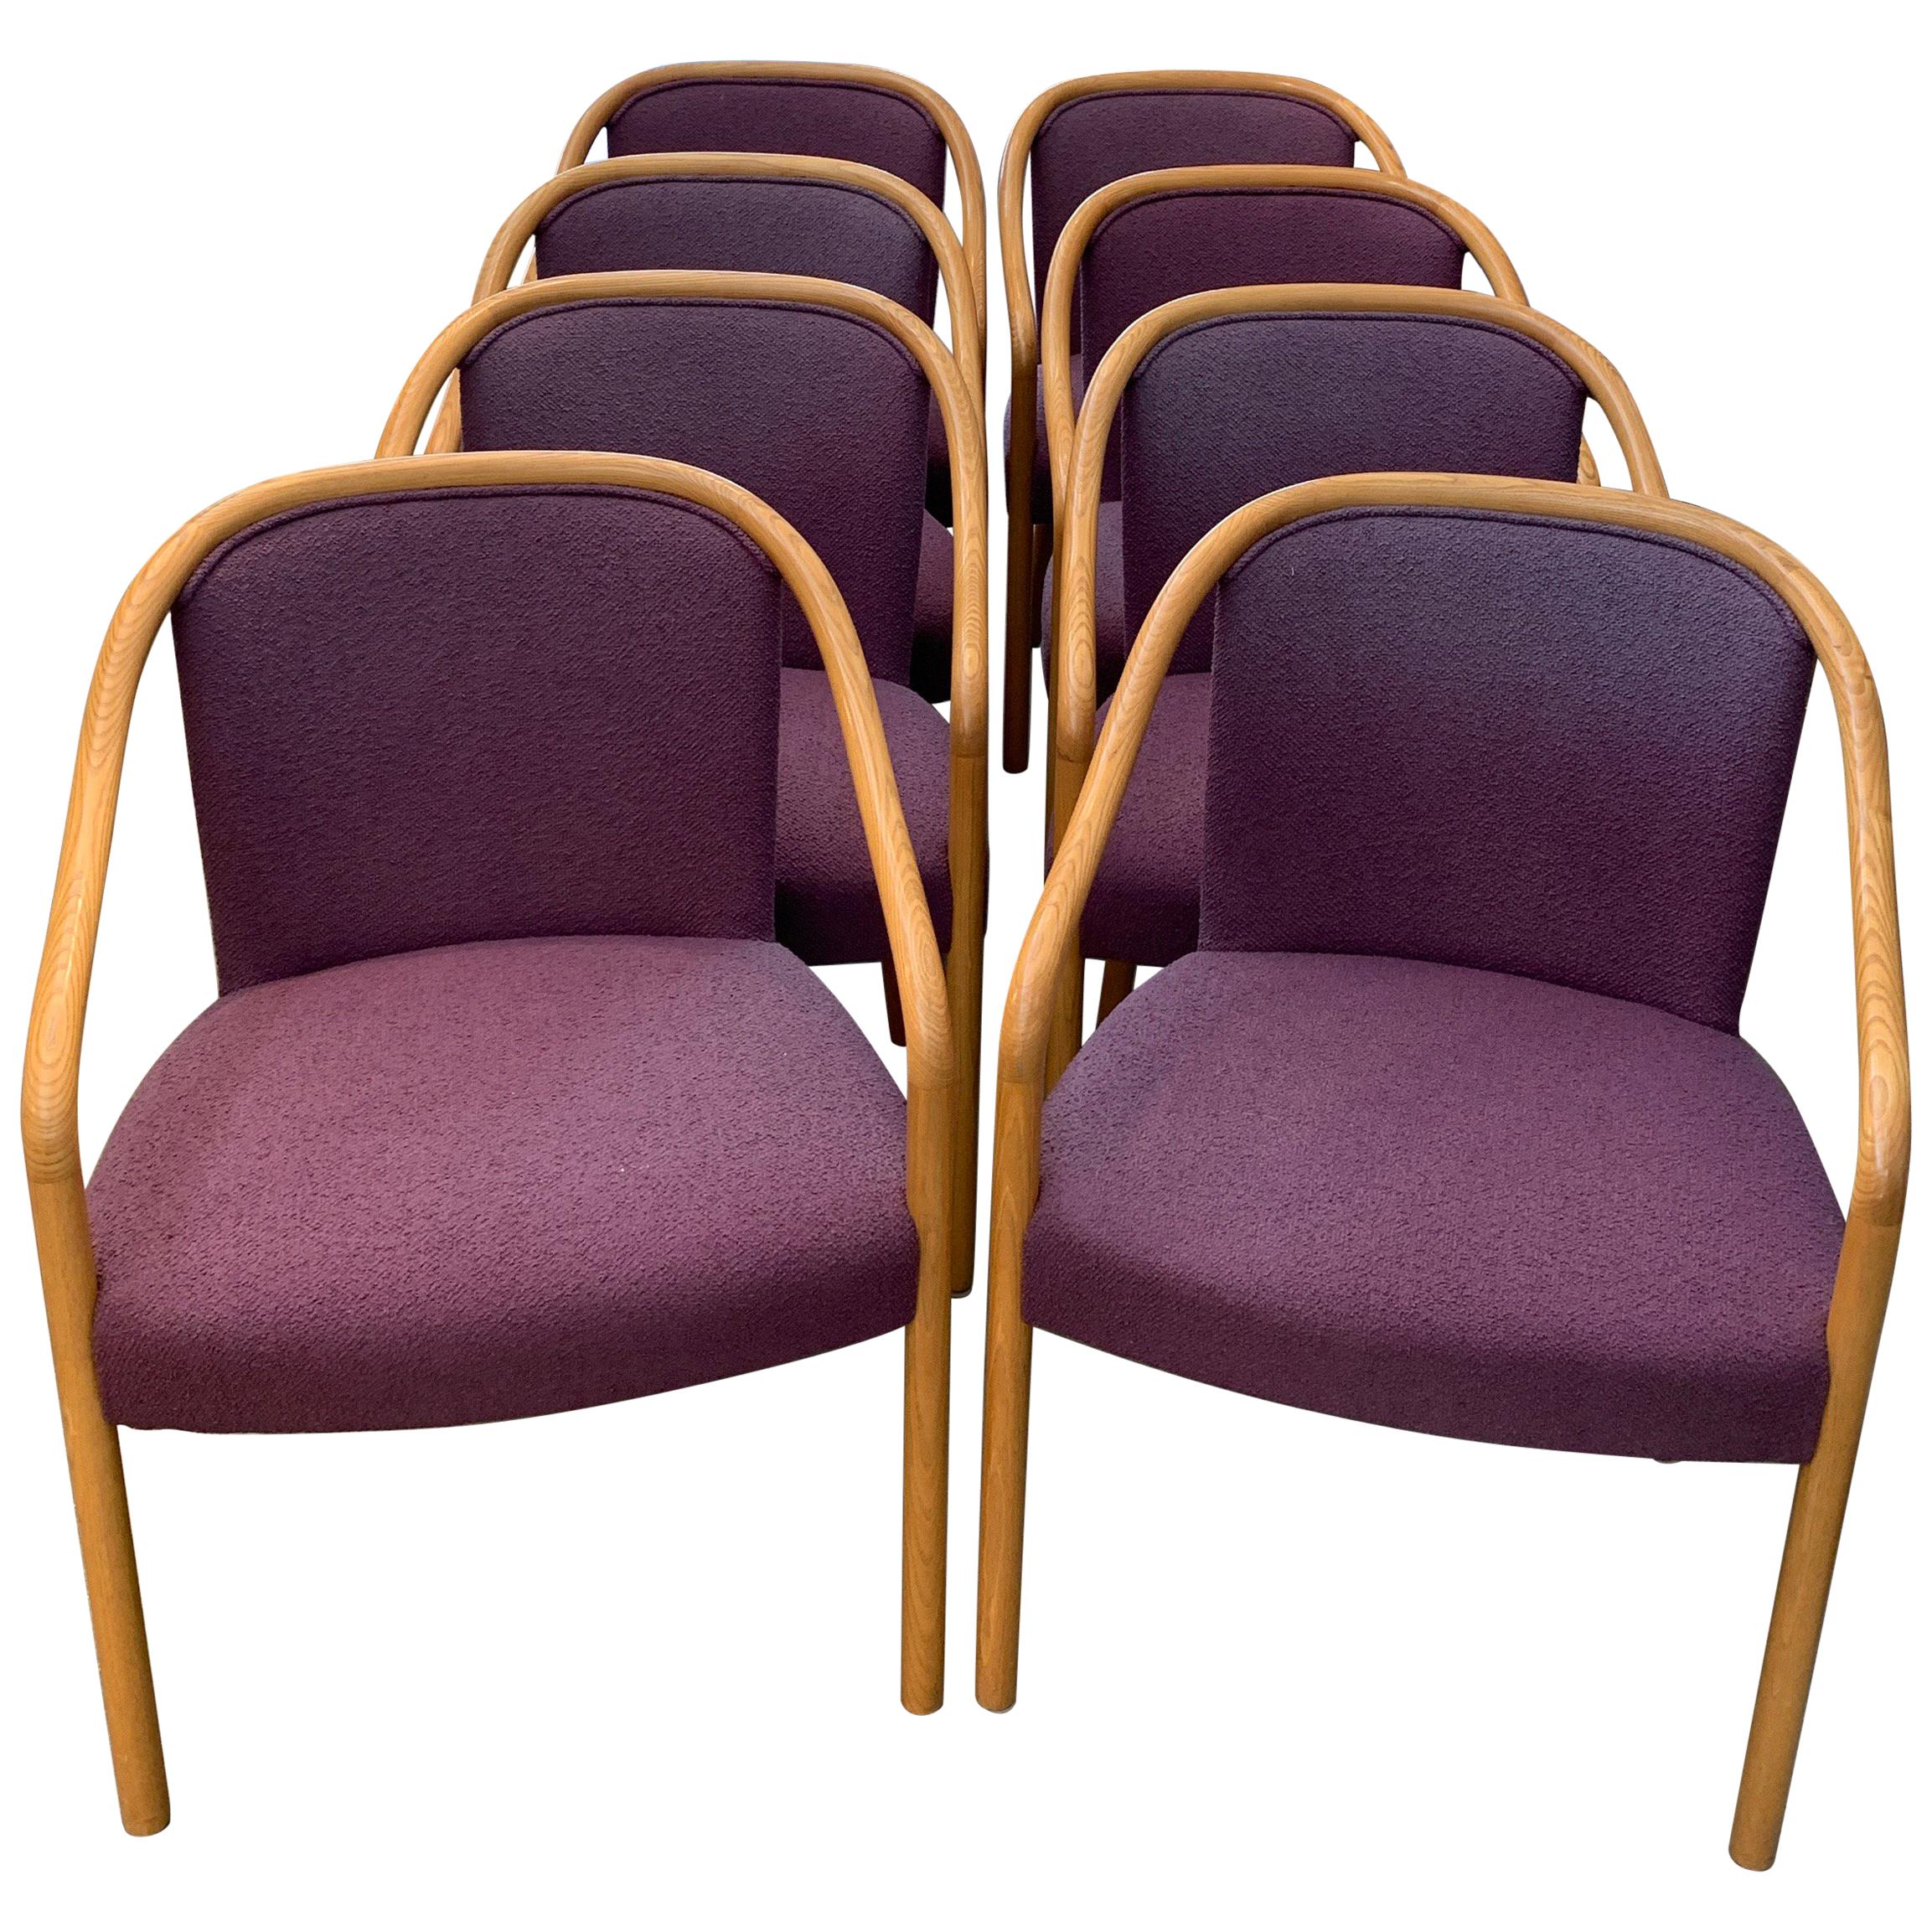 8 Dining Chairs by Brickel Associates for Arthur Elrod in Plum